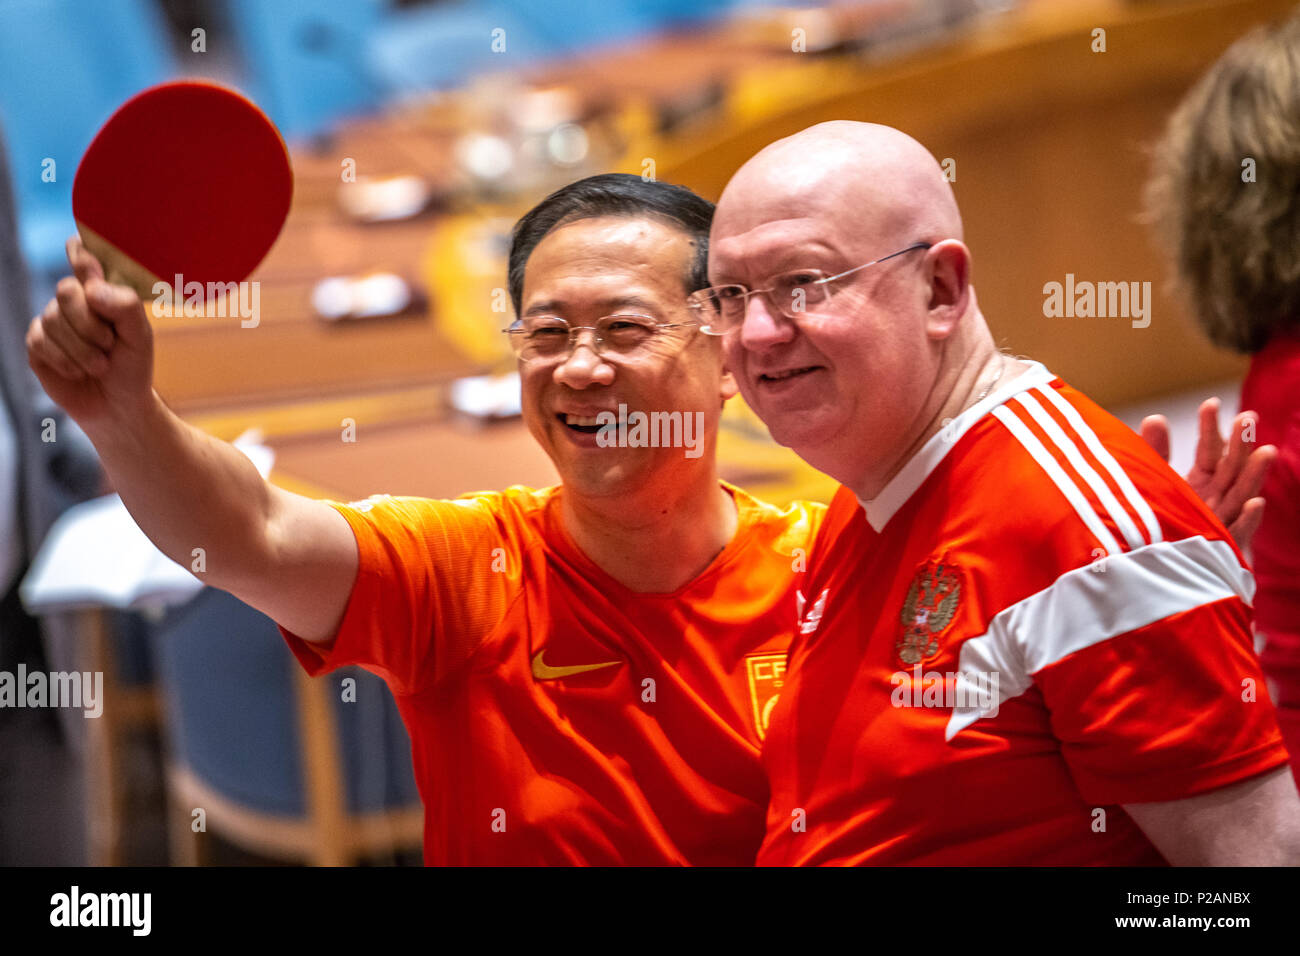 New York, USA, 14 June 2018. Vassily Nebenzia, Permanent Representative of the Russian Federation to the United Nations and President of the Security Council for the month of June R) poses with China's Ambassador to the UN Ma Zhaoxu holding up a table tennis racket as they wear soccer jerseys  to mark the opening day of the 2018 FIFA World Cup, being hosted by the Russian Federation from 14 June to 15 July. Credit: Enrique Shore/Alamy Live News Stock Photo